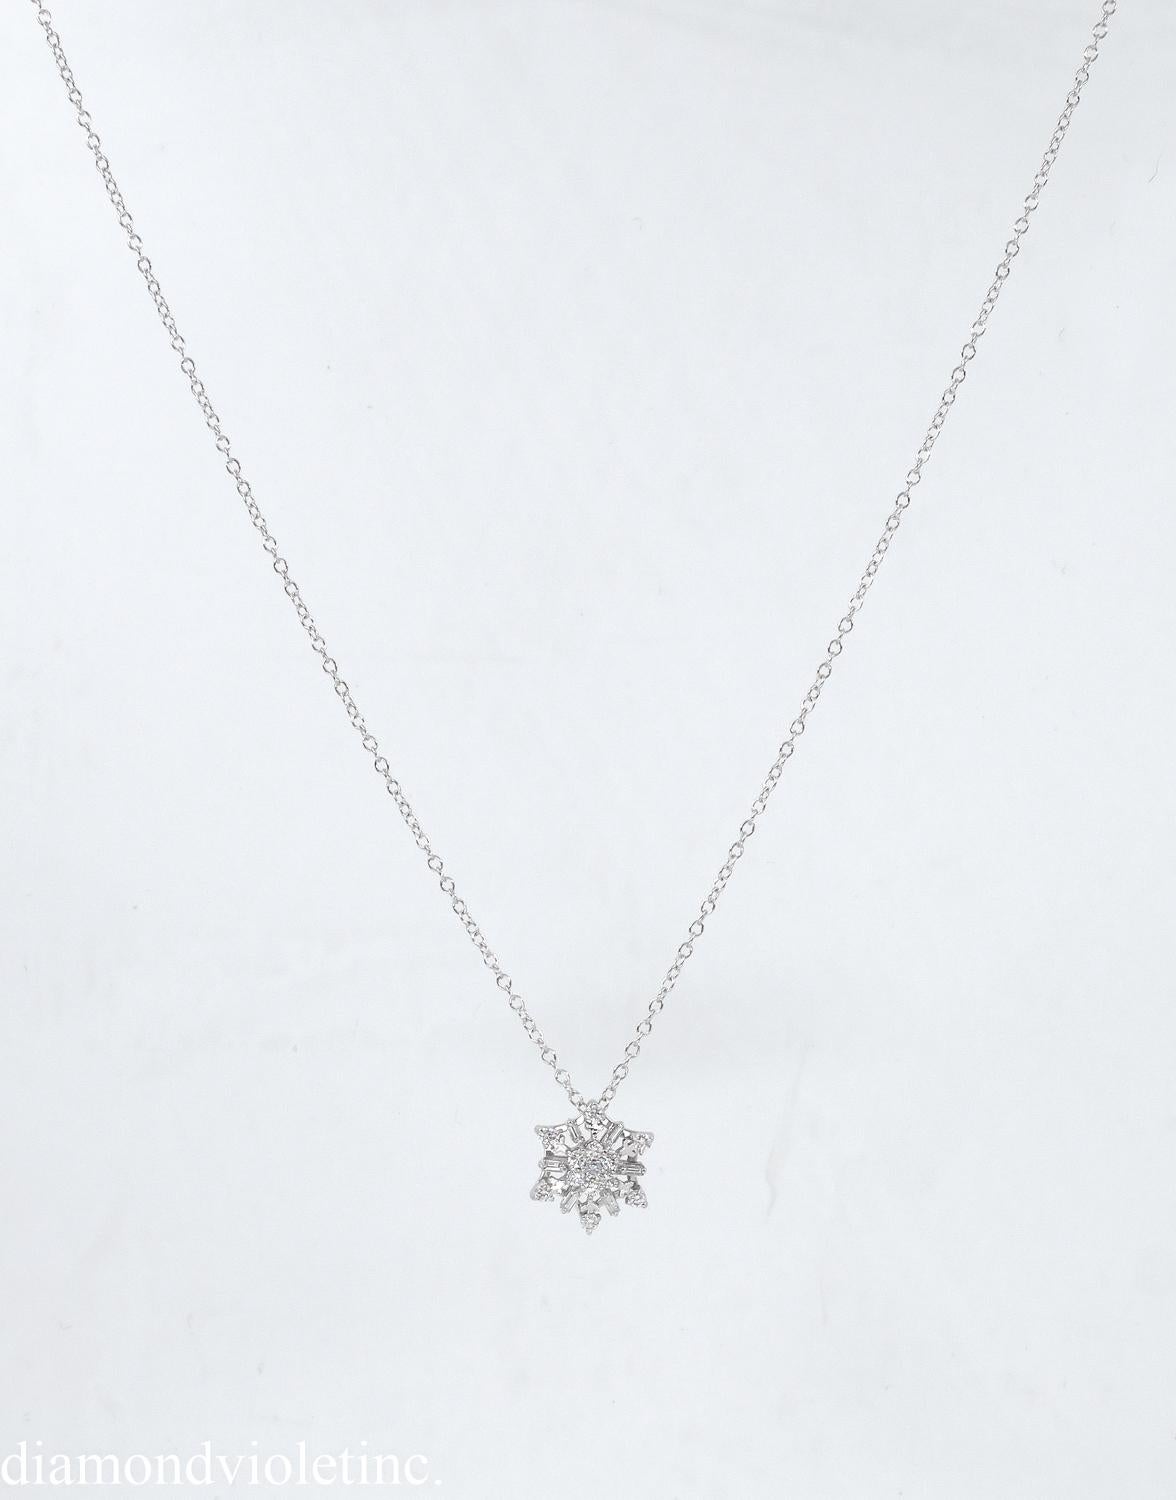 A wonderful Estate Diamond Snowflake Pendant with chain in 14K White Gold (stamped), all Diamonds estimated as 0.50CT in F-G color, SI clarity. White and so BRILLIANT and Sparkly that you won't notice some few natural imperfections that the diamond